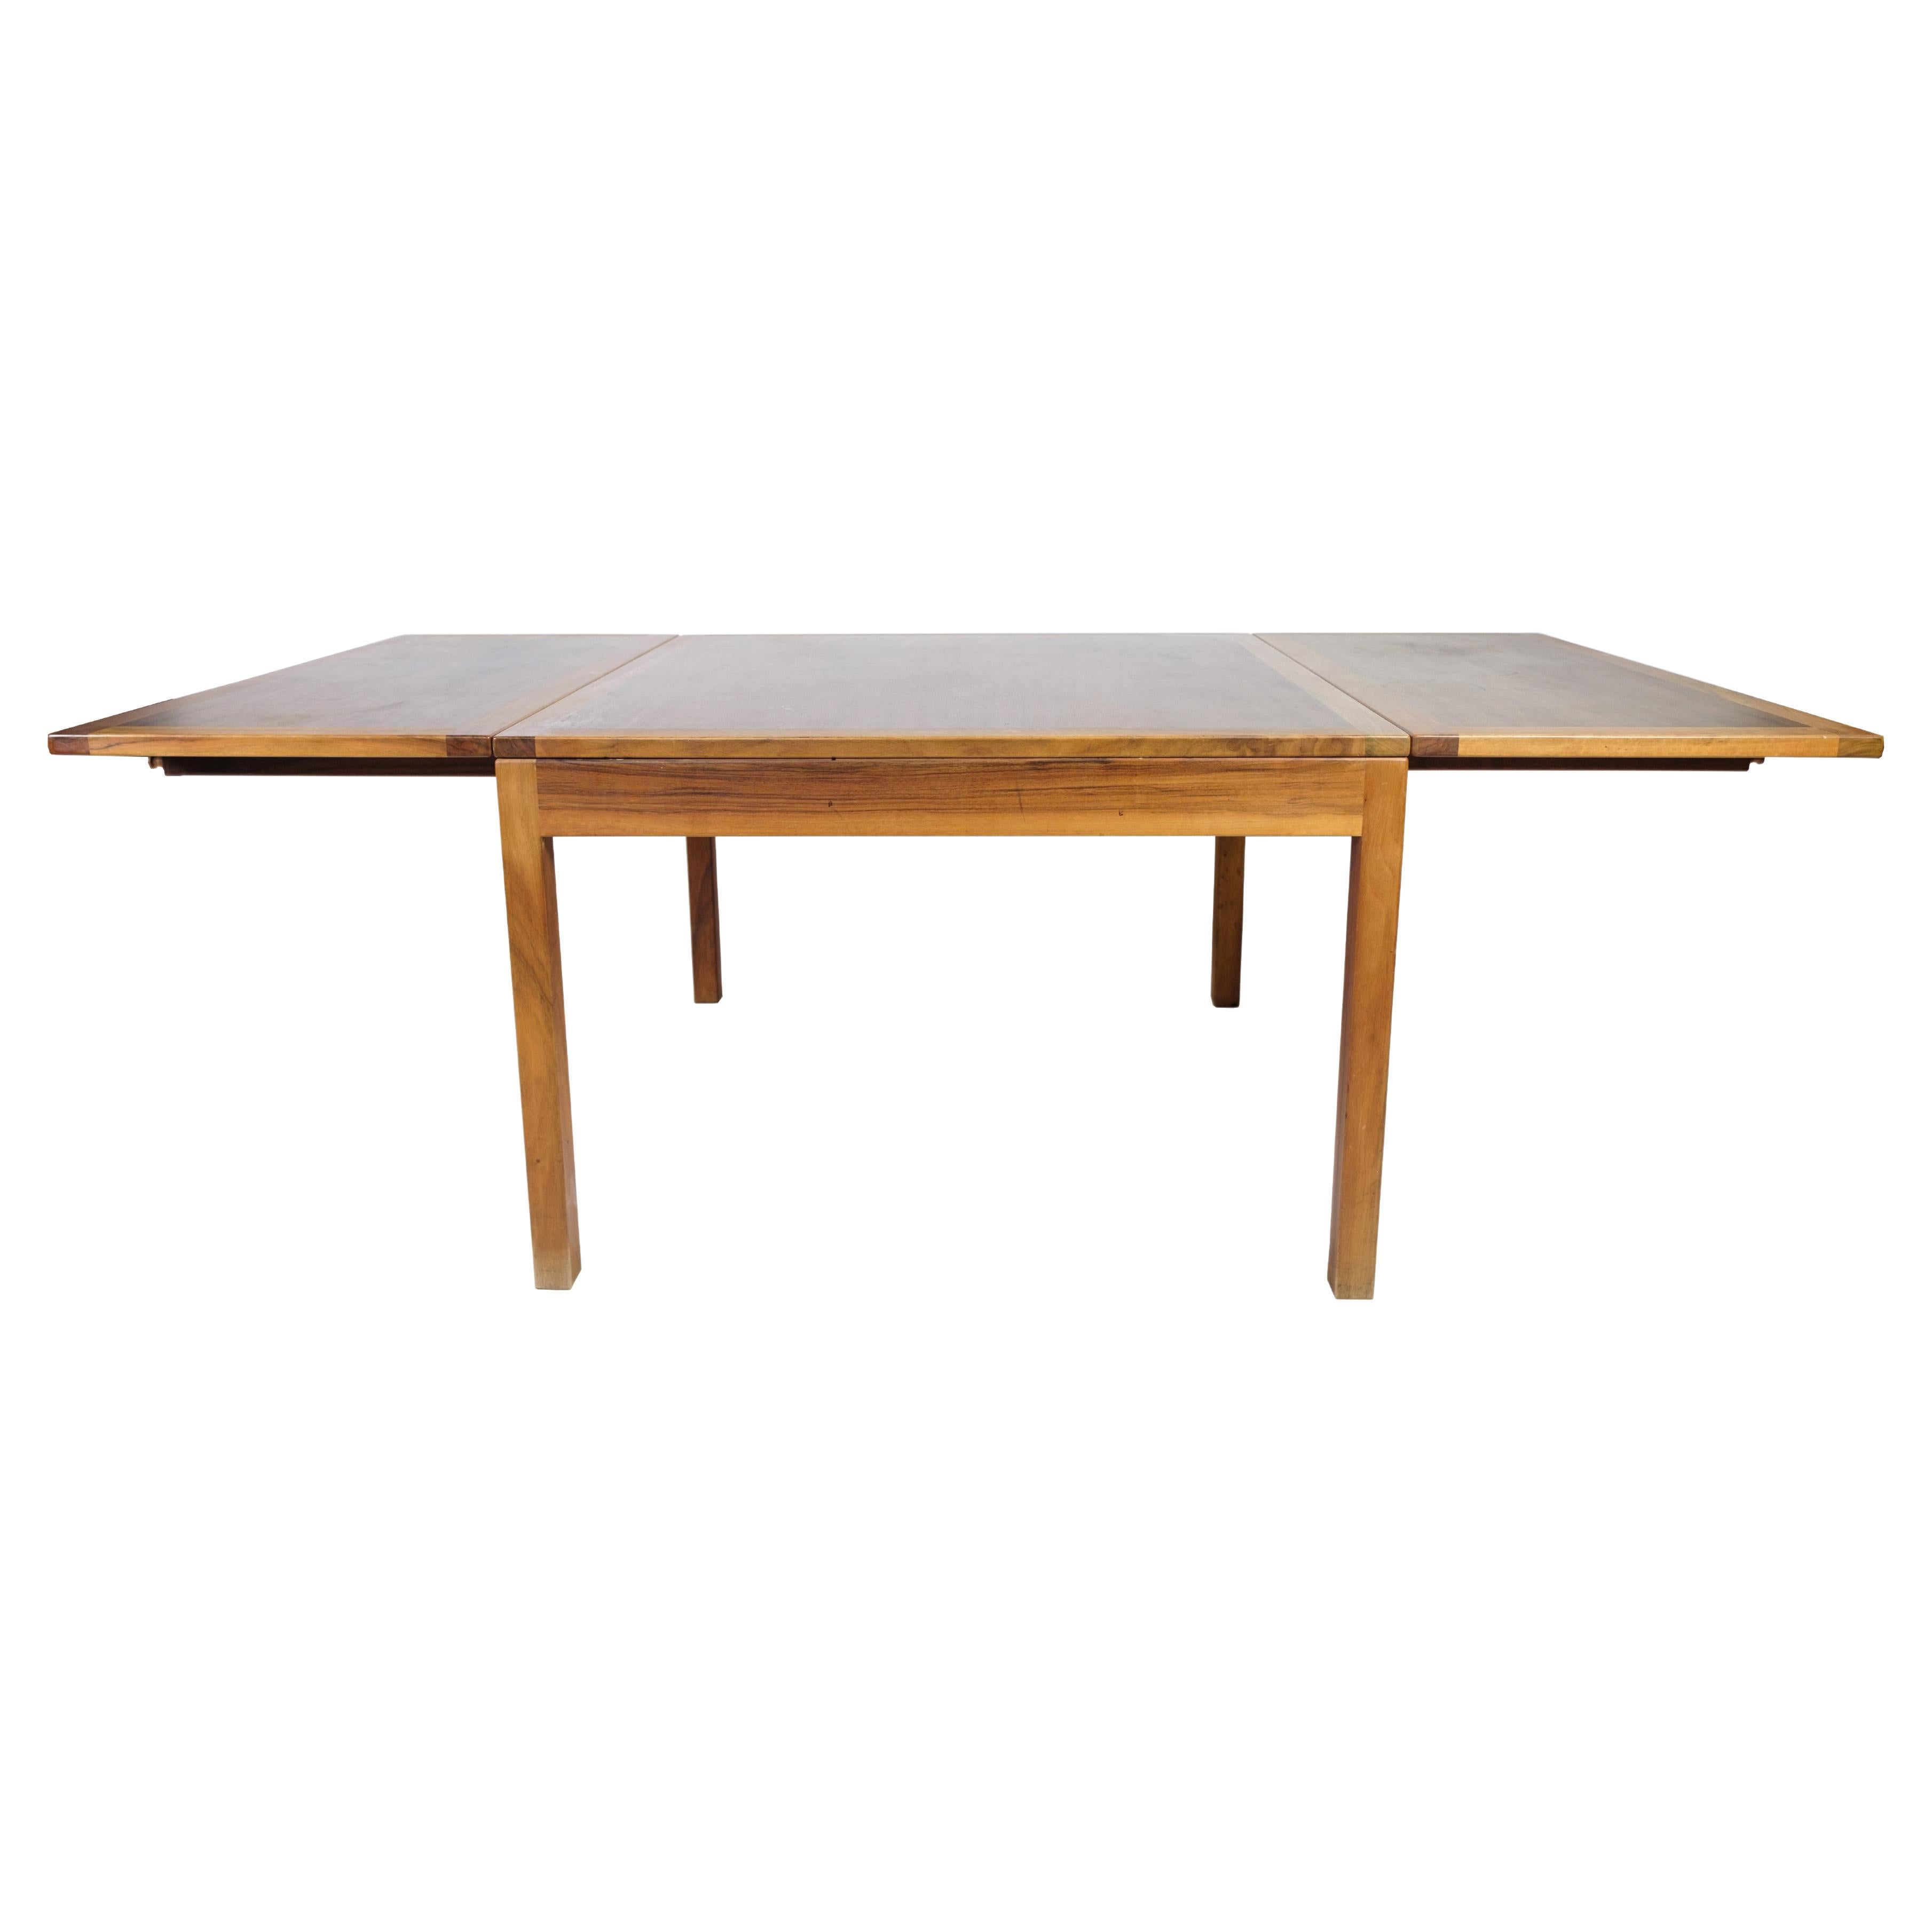 This coffee table, crafted in mahogany/walnut and bearing the model number 5362, showcases the renowned design prowess of Danish furniture designer Børge Mogensen and is manufactured by Fredericia Furniture.

Practicality meets elegance with flaps